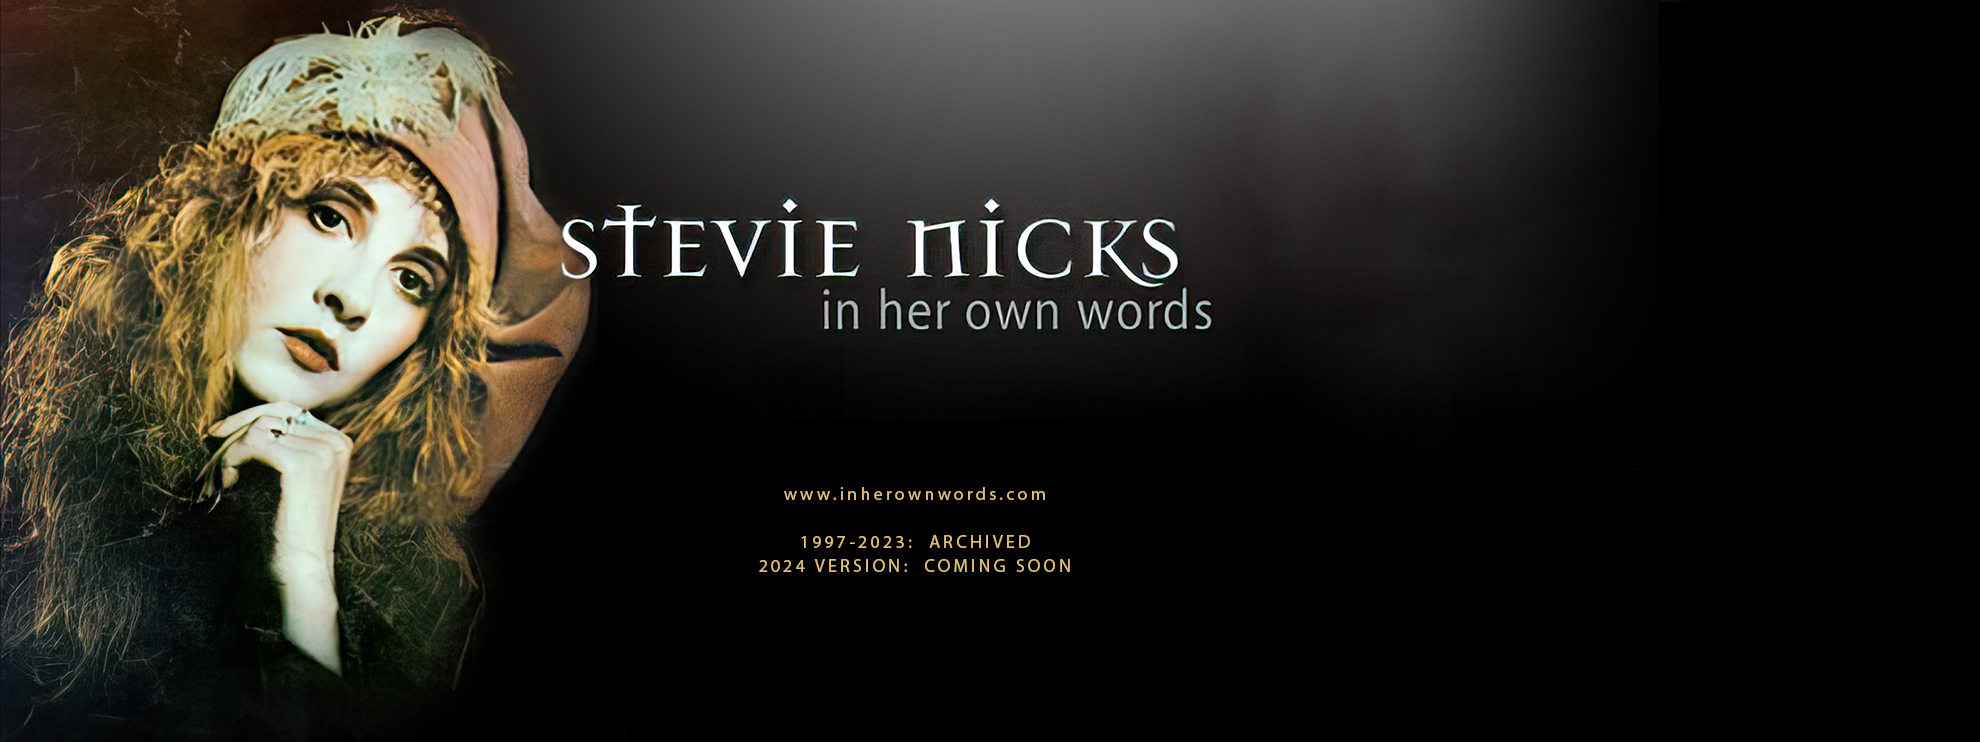 Stevie Nicks in her own words website 1997-2023 - archived. 2024 version coming soon.